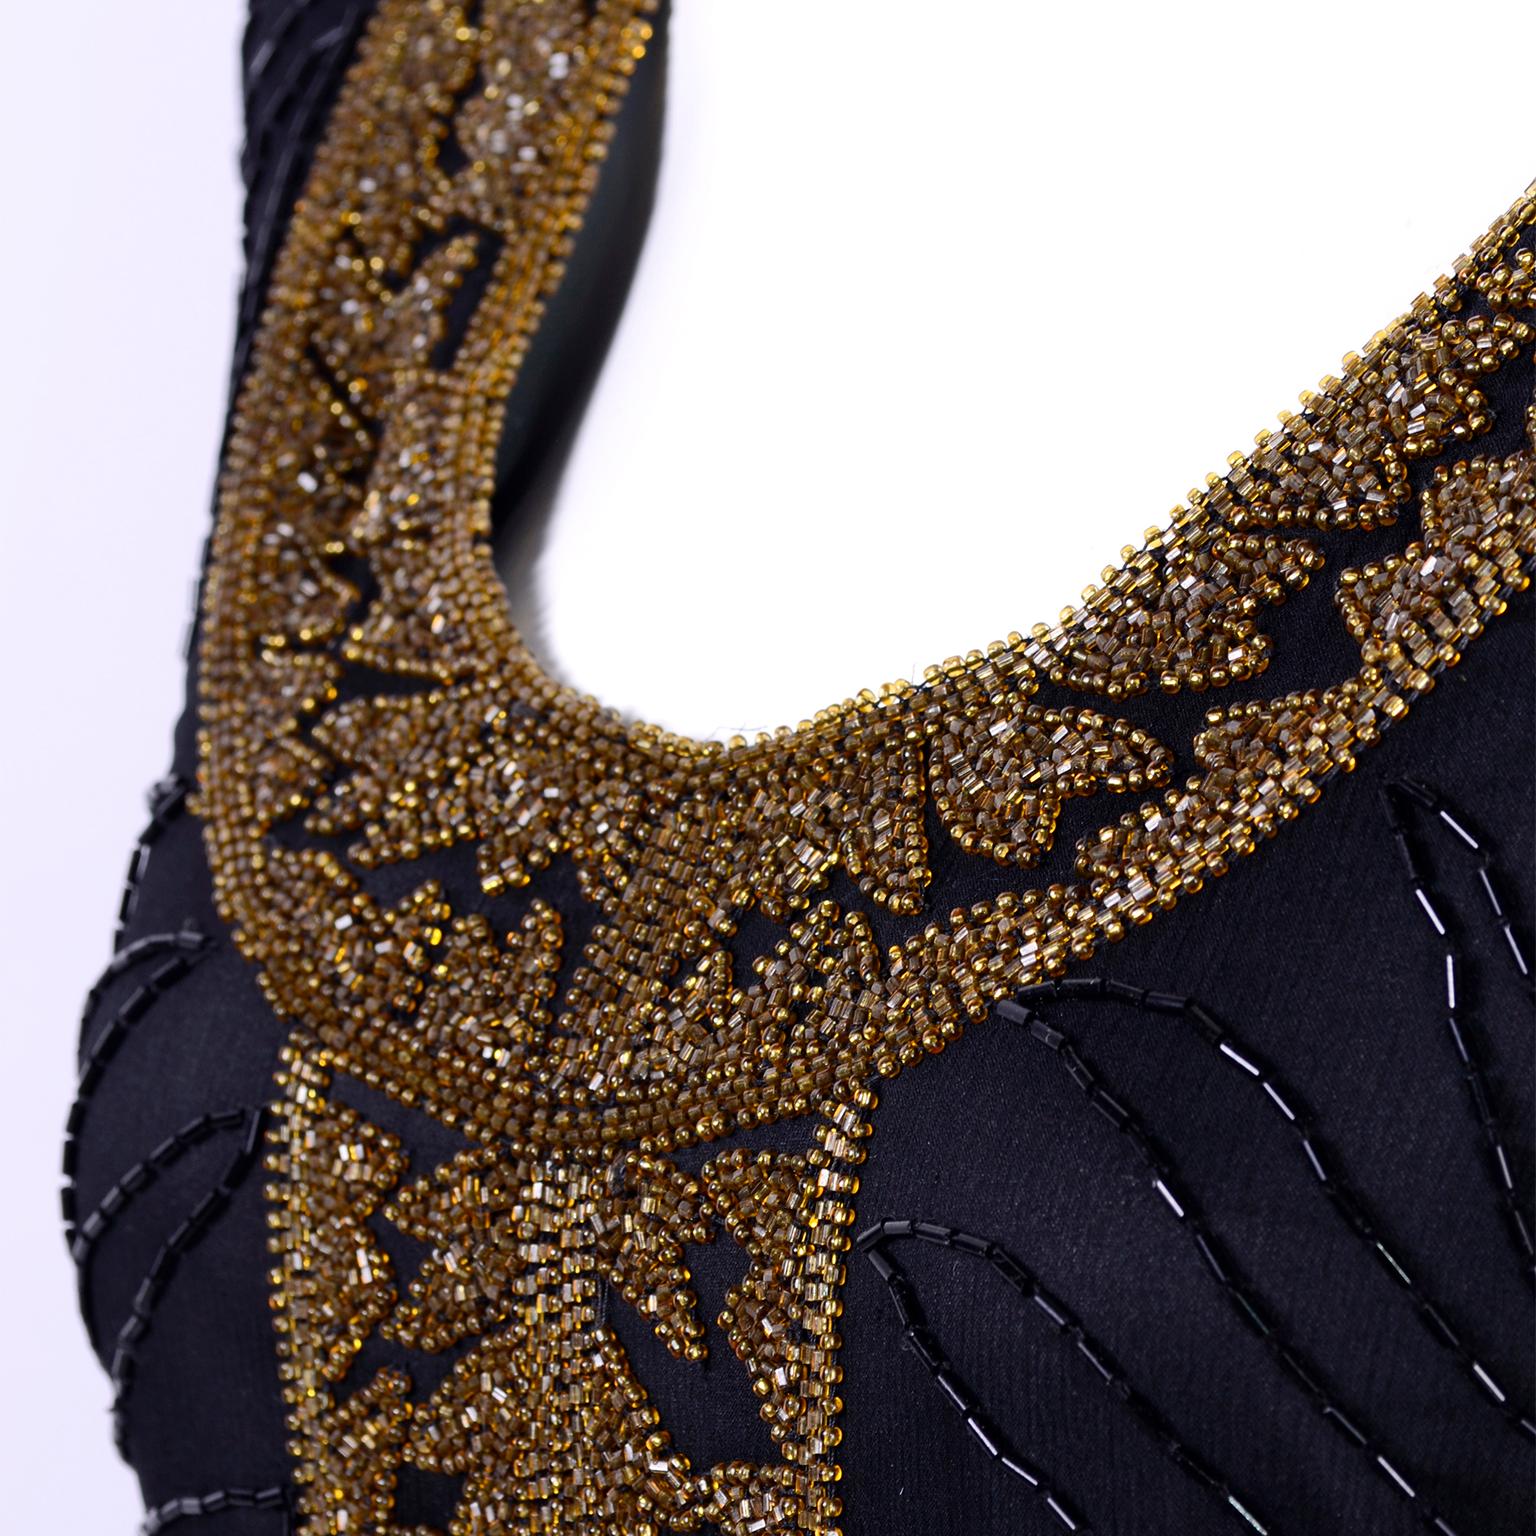 Vintage 1980s Black Silk Dress Heavily Beaded W Black & Gold Bronze Beads  In Excellent Condition For Sale In Portland, OR